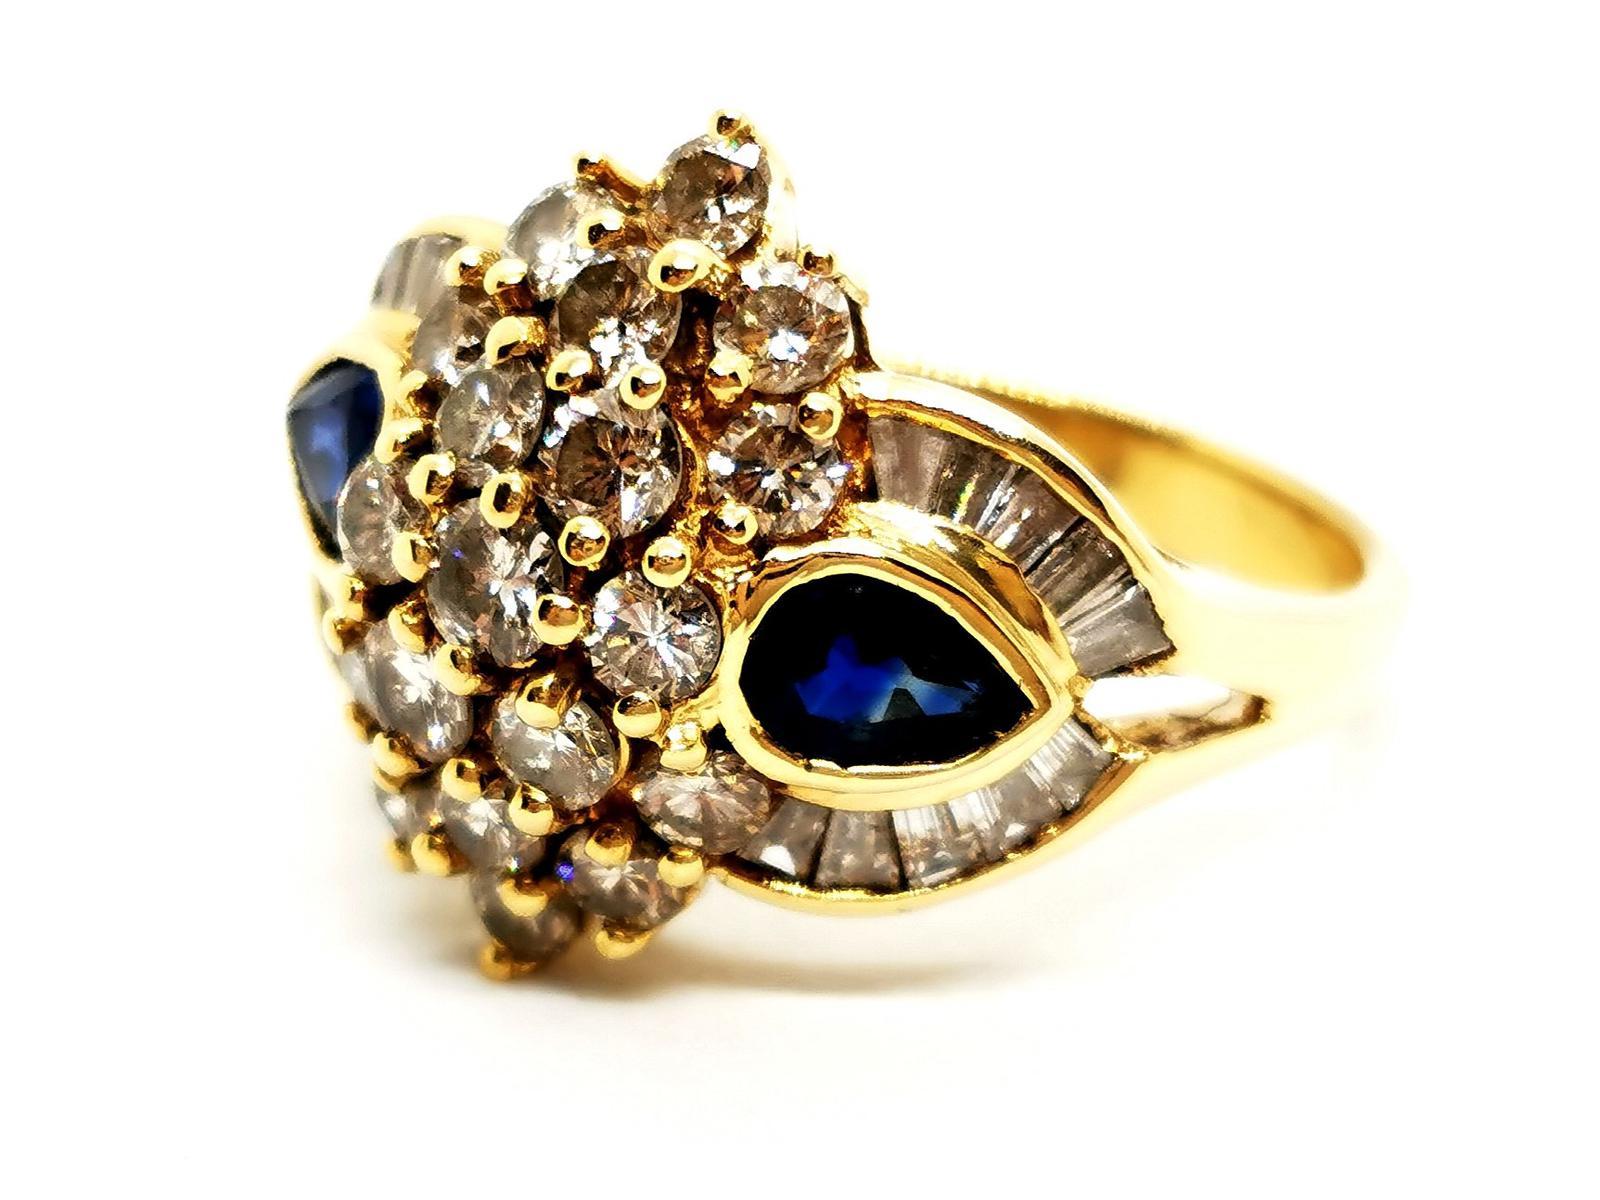 Yellow gold ring 750 mils (18 carats). diamond and blue sapphire. consisting of a center 19 of brilliant-cut diamonds. about 1.46 ct in total. supported by two blue sapphires cut pear. from about 0.355 ct each surrounded by lines 20 baguette